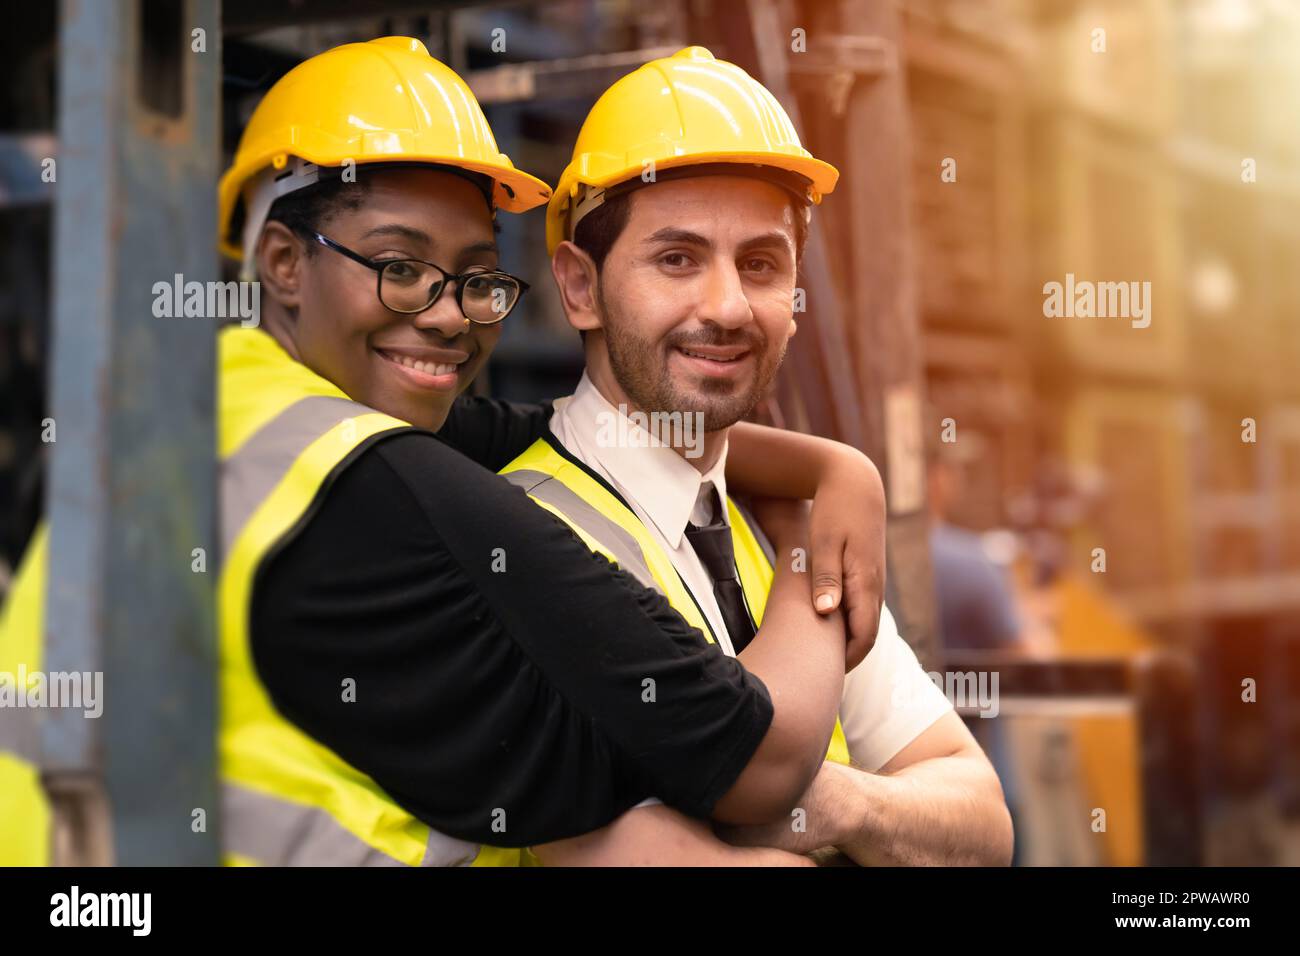 Happy industry worker friends working together mix race gender. black woman with hispanic latin man. Stock Photo